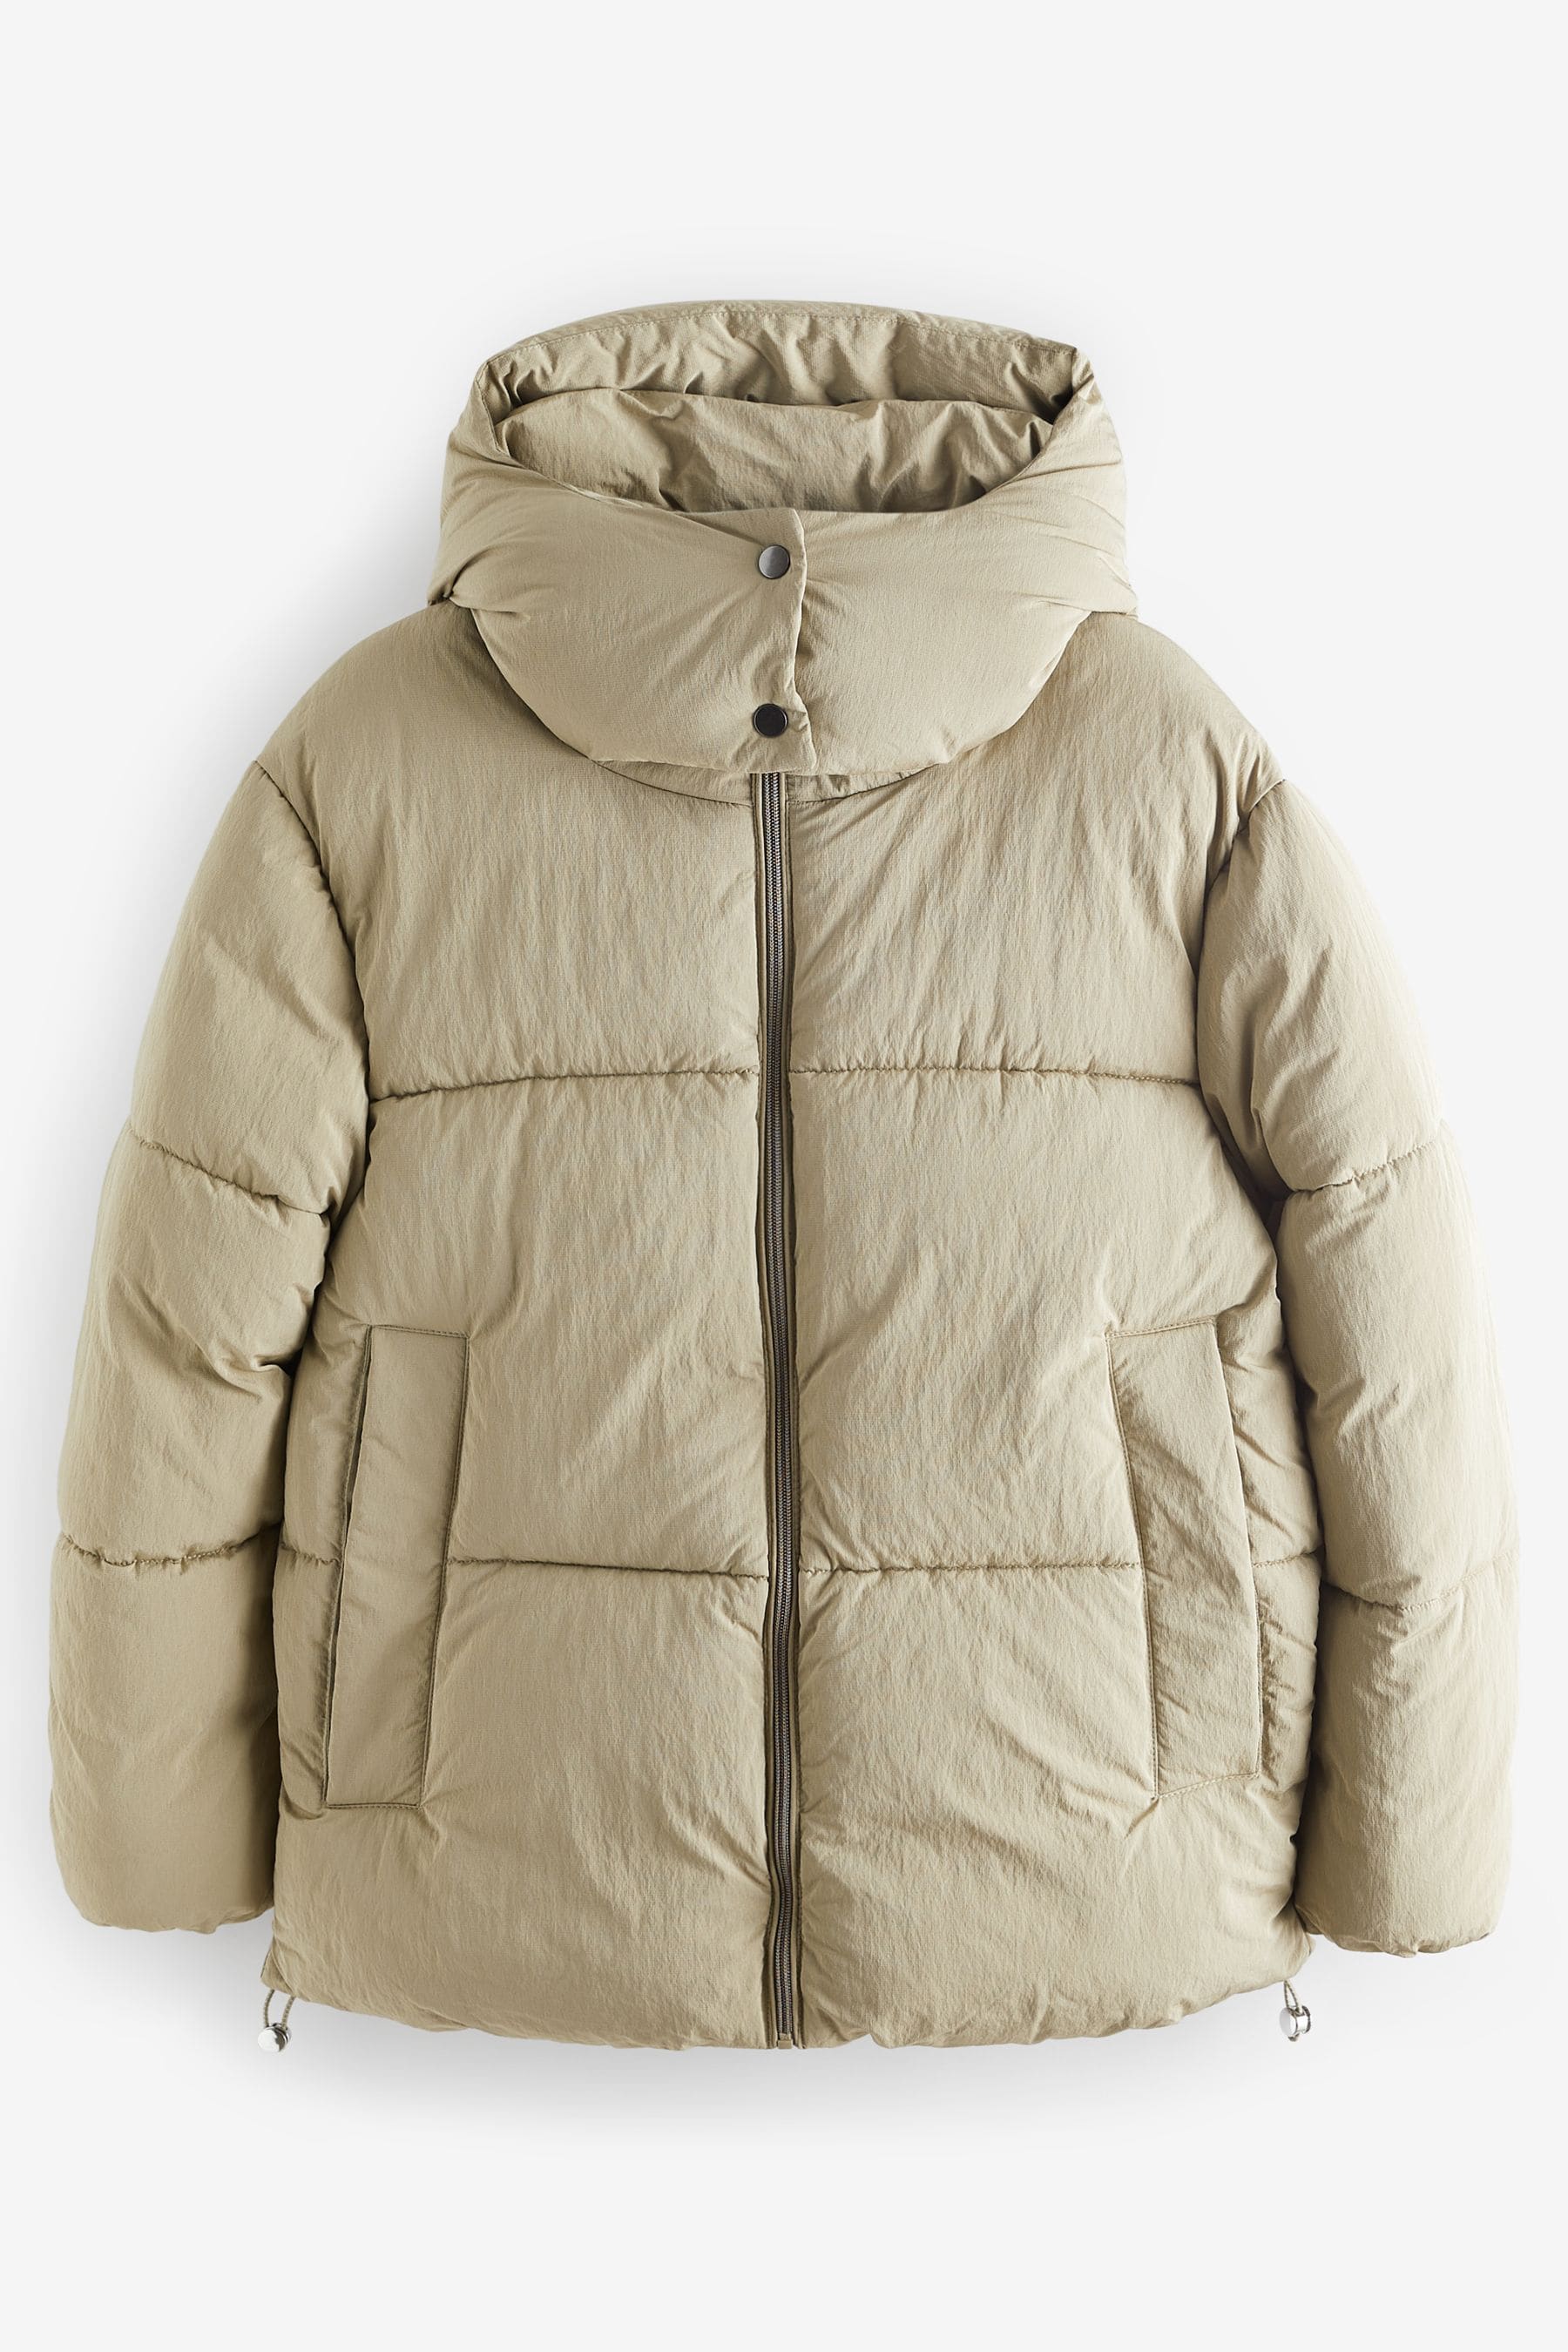 Buy Sage Green Hooded Padded Coat from the Next UK online shop